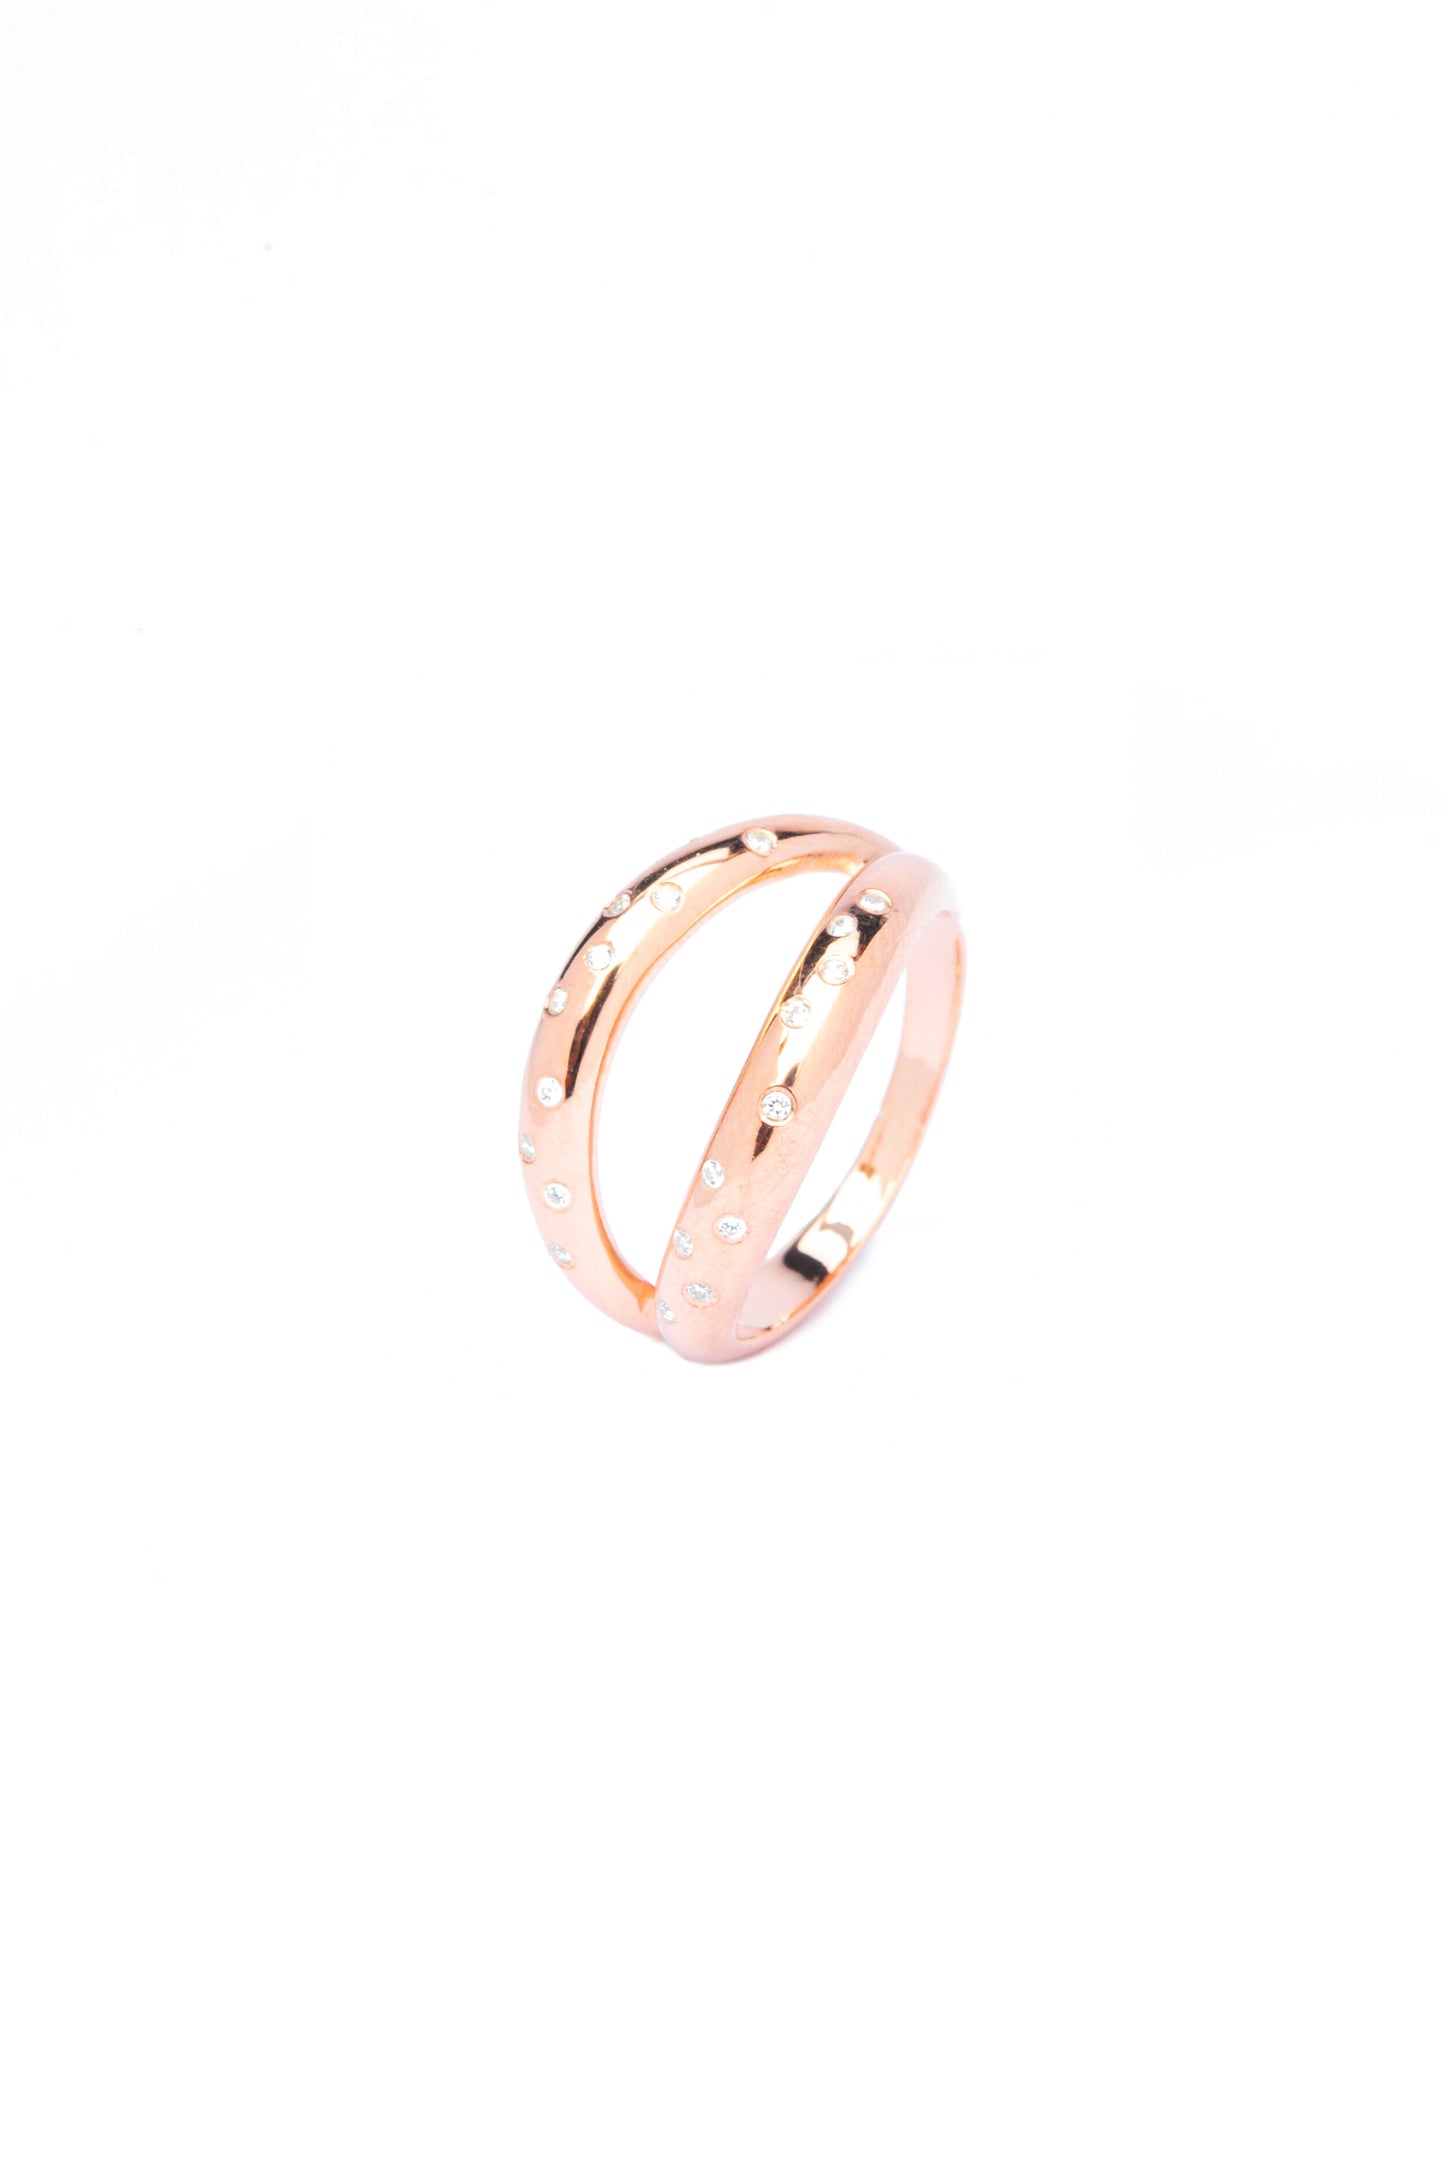 Stardust Ring - Pink Gold Plated